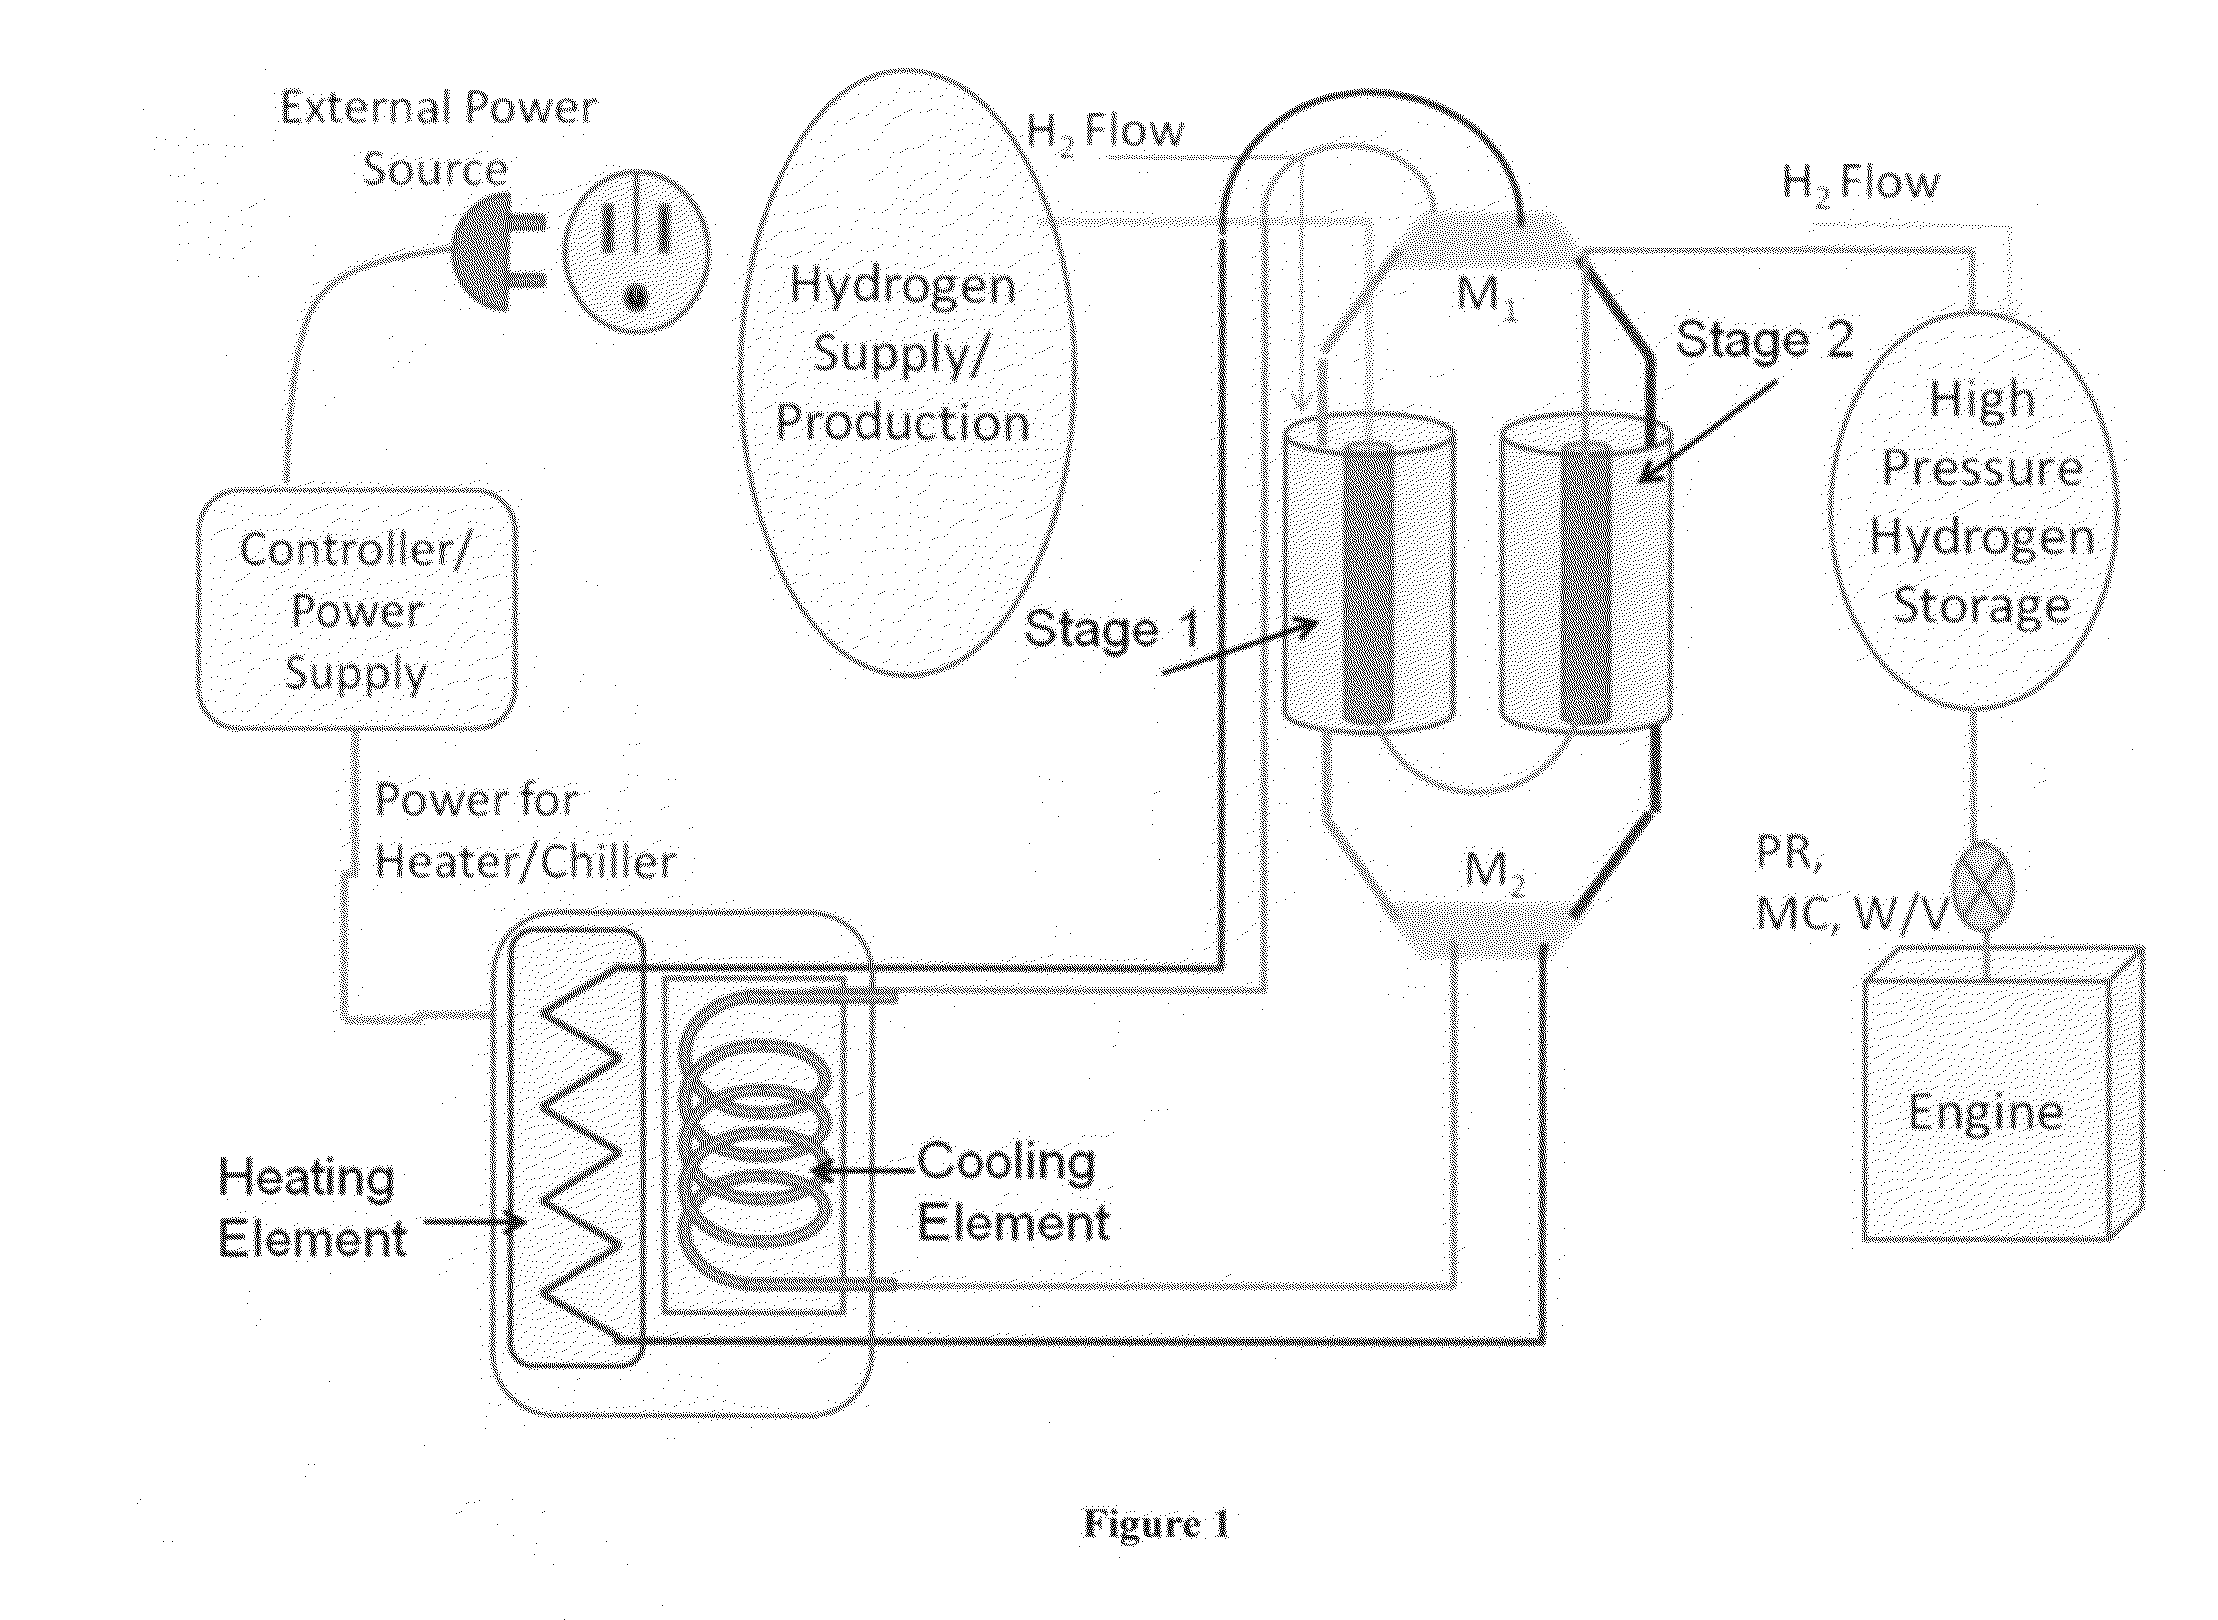 Multi Stage Hydrogen Compression & Delivery System for Internal Combustion Engines Utilizing Working Fluid